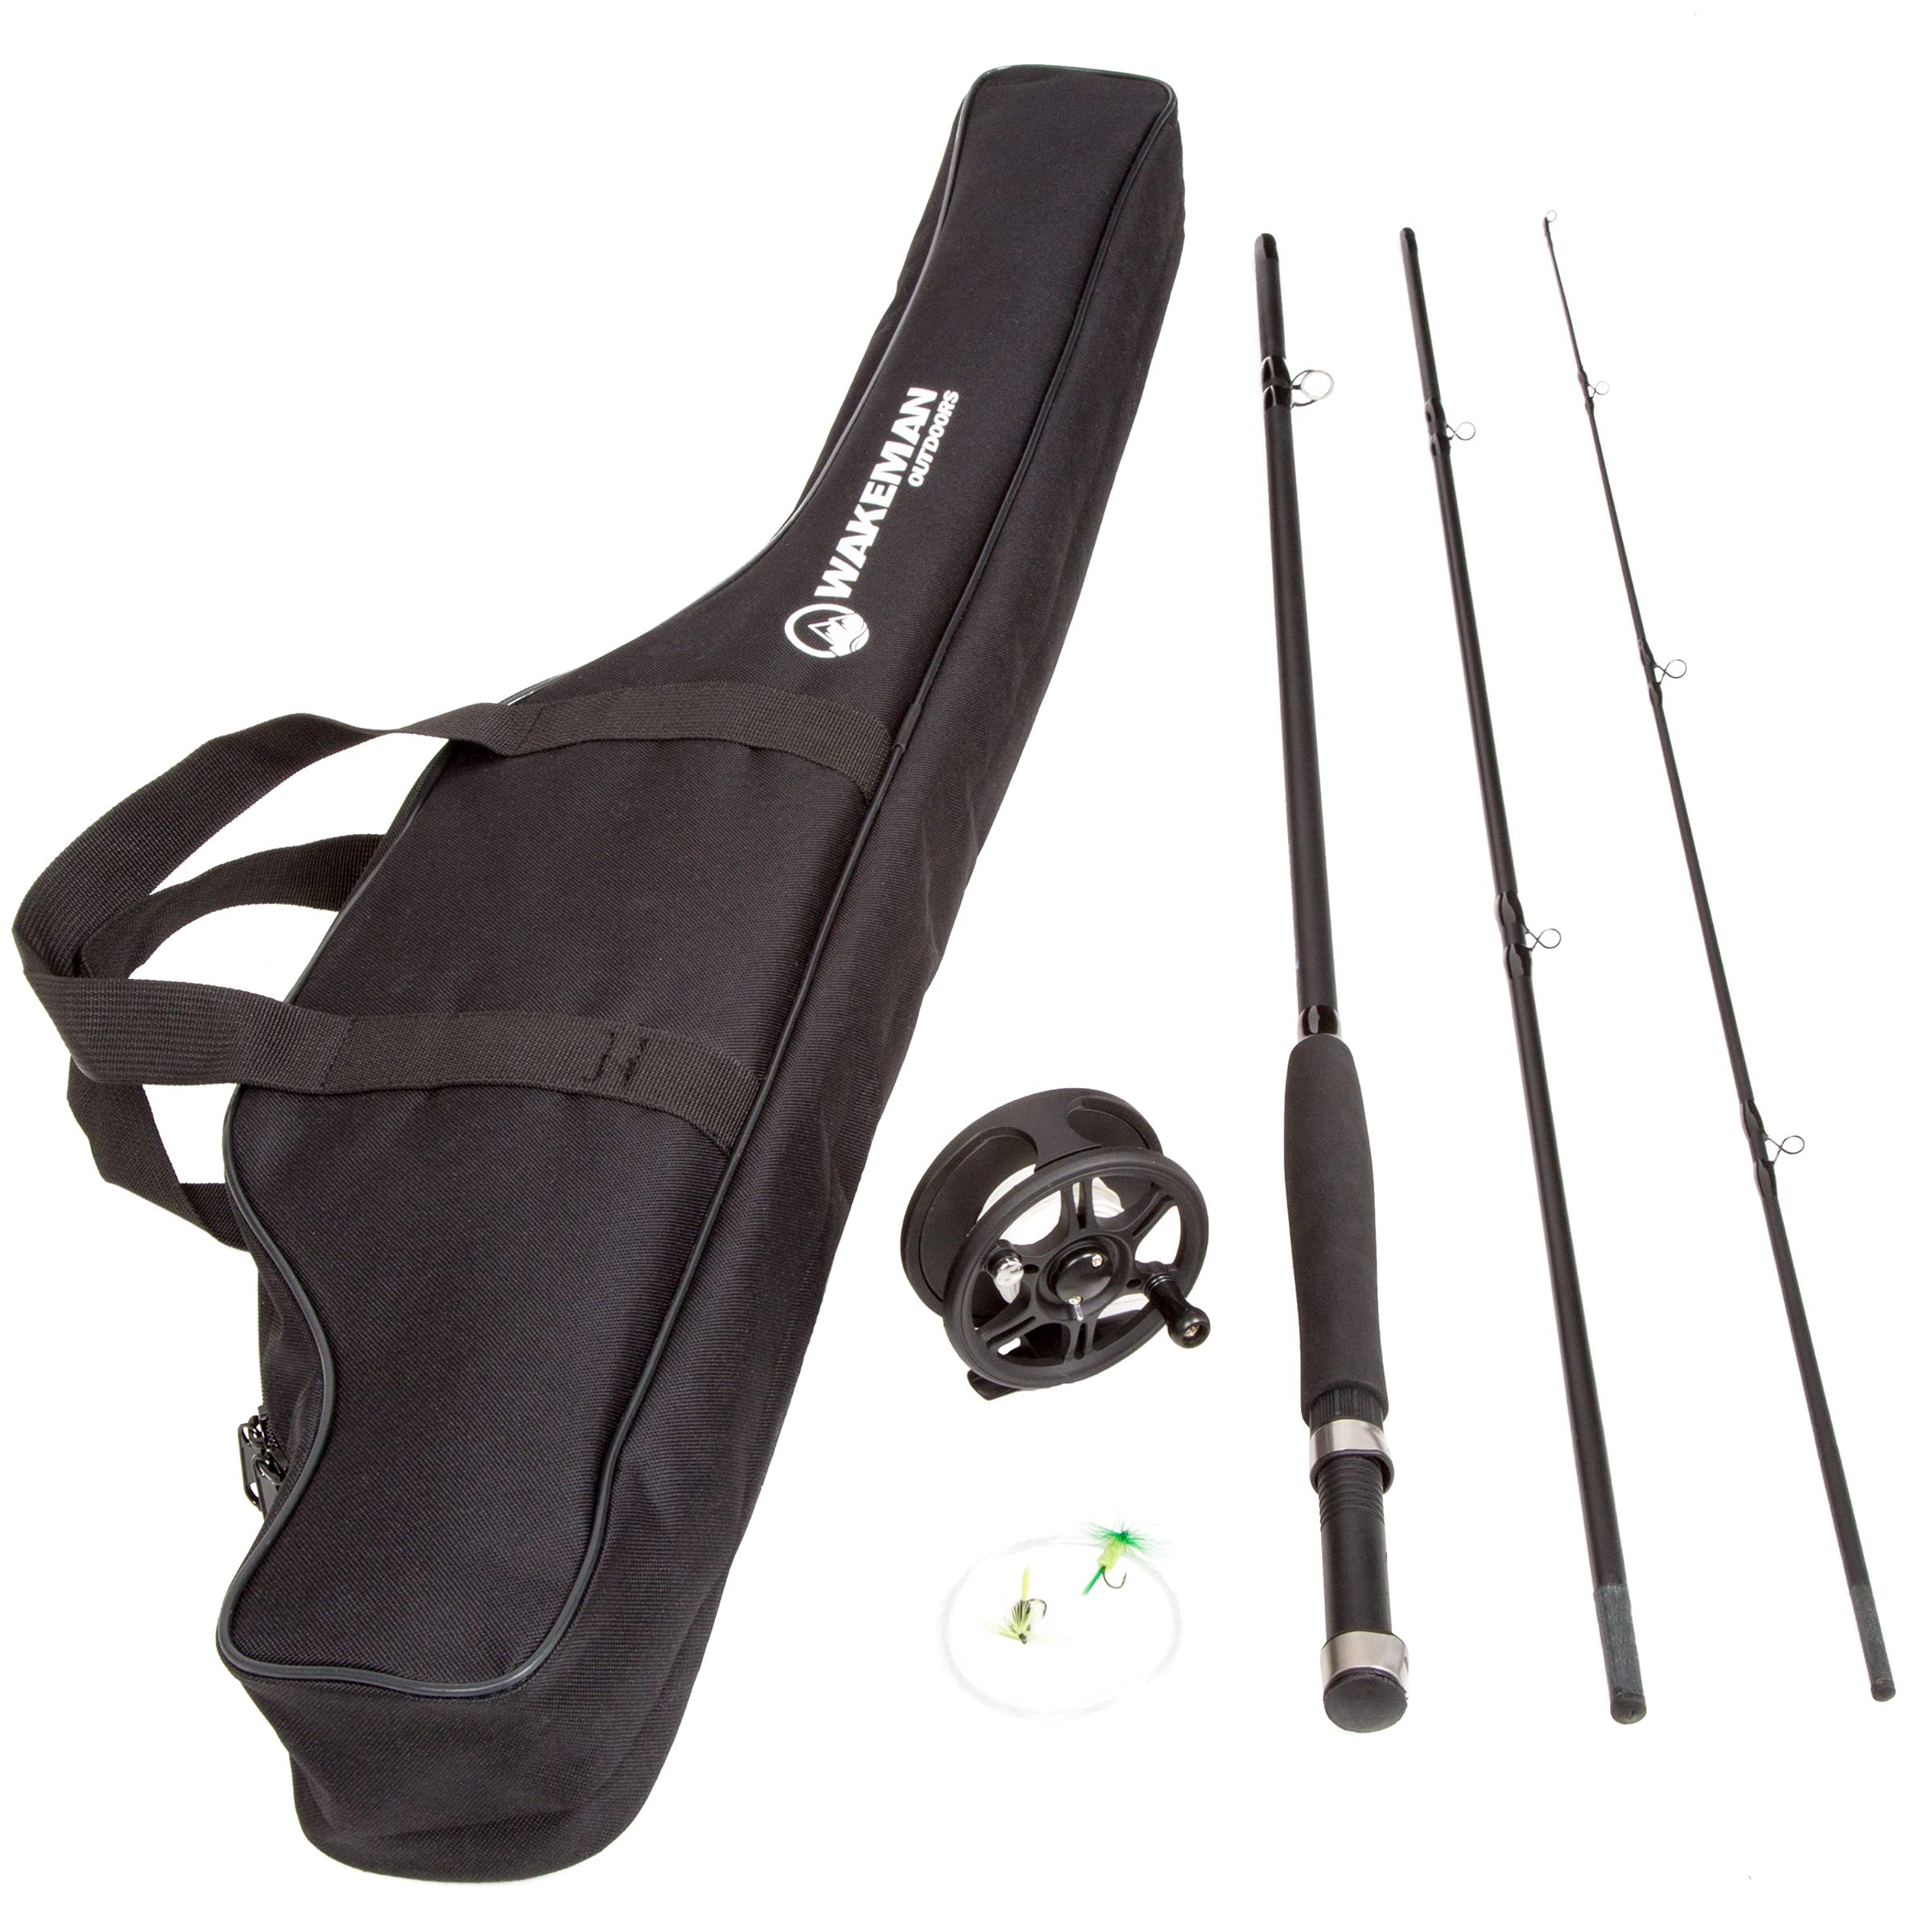 Fly Fishing Pole Collection 3 Piece Collapsible Fiberglass and Cork Rod and  Ambidextrous Reel Combo with Carry Case and Accessories by Wakeman Outdoors  Charter Series Fly Fishing Combo Kit